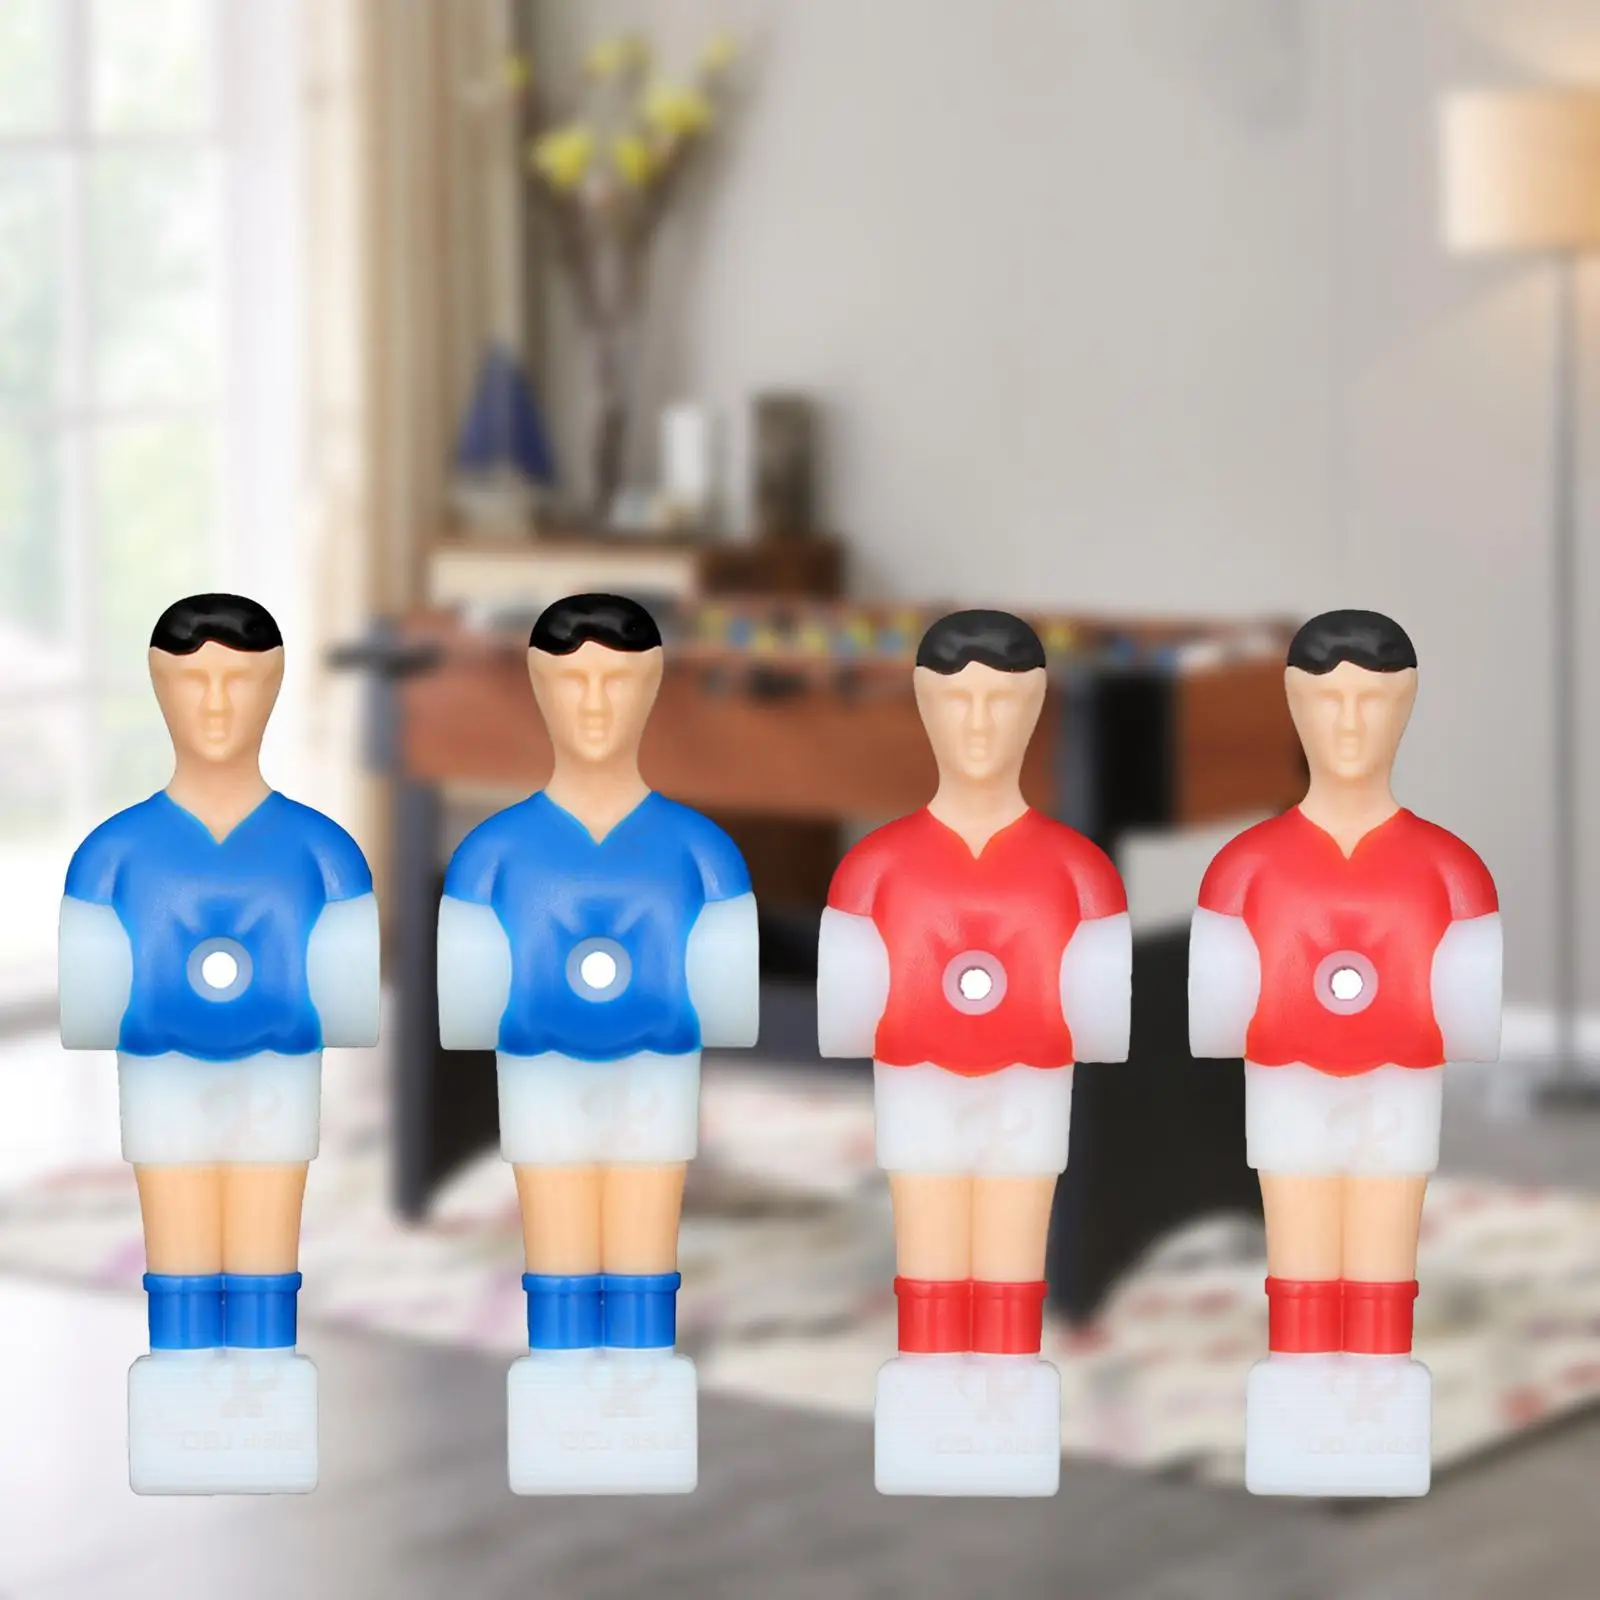 4Pcs Foosball Men Soccer Table Player Mini Doll Table Football Machine Accessory Table Foosball Player Replacement Parts